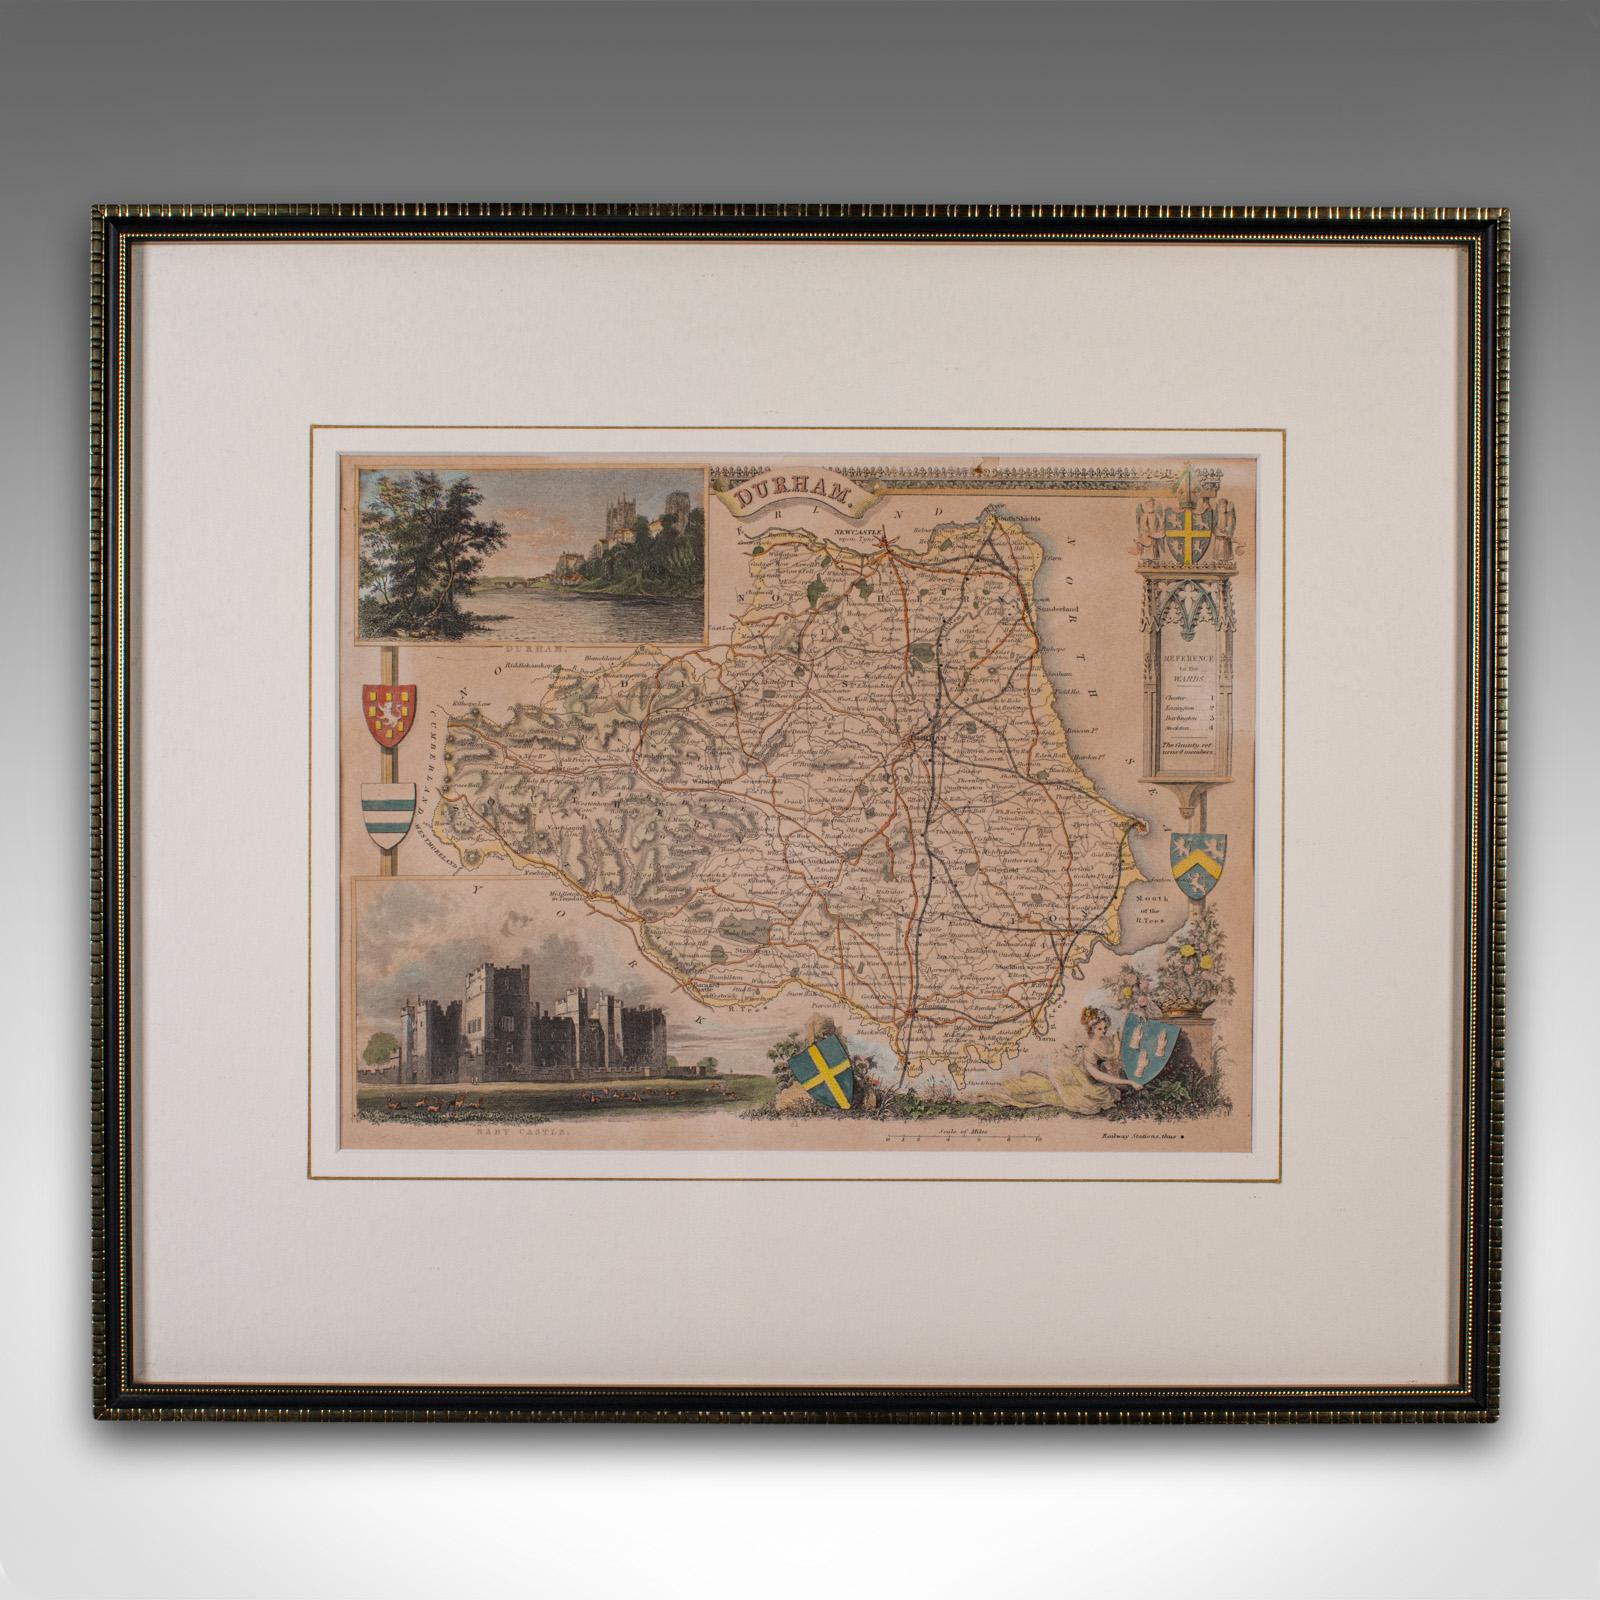 This is an antique lithography map of County Durham. An English, framed atlas engraving of cartographic interest, dating to the mid 19th century and later.

Superb lithography of County Durham and regional detail, perfect for display
Displaying a